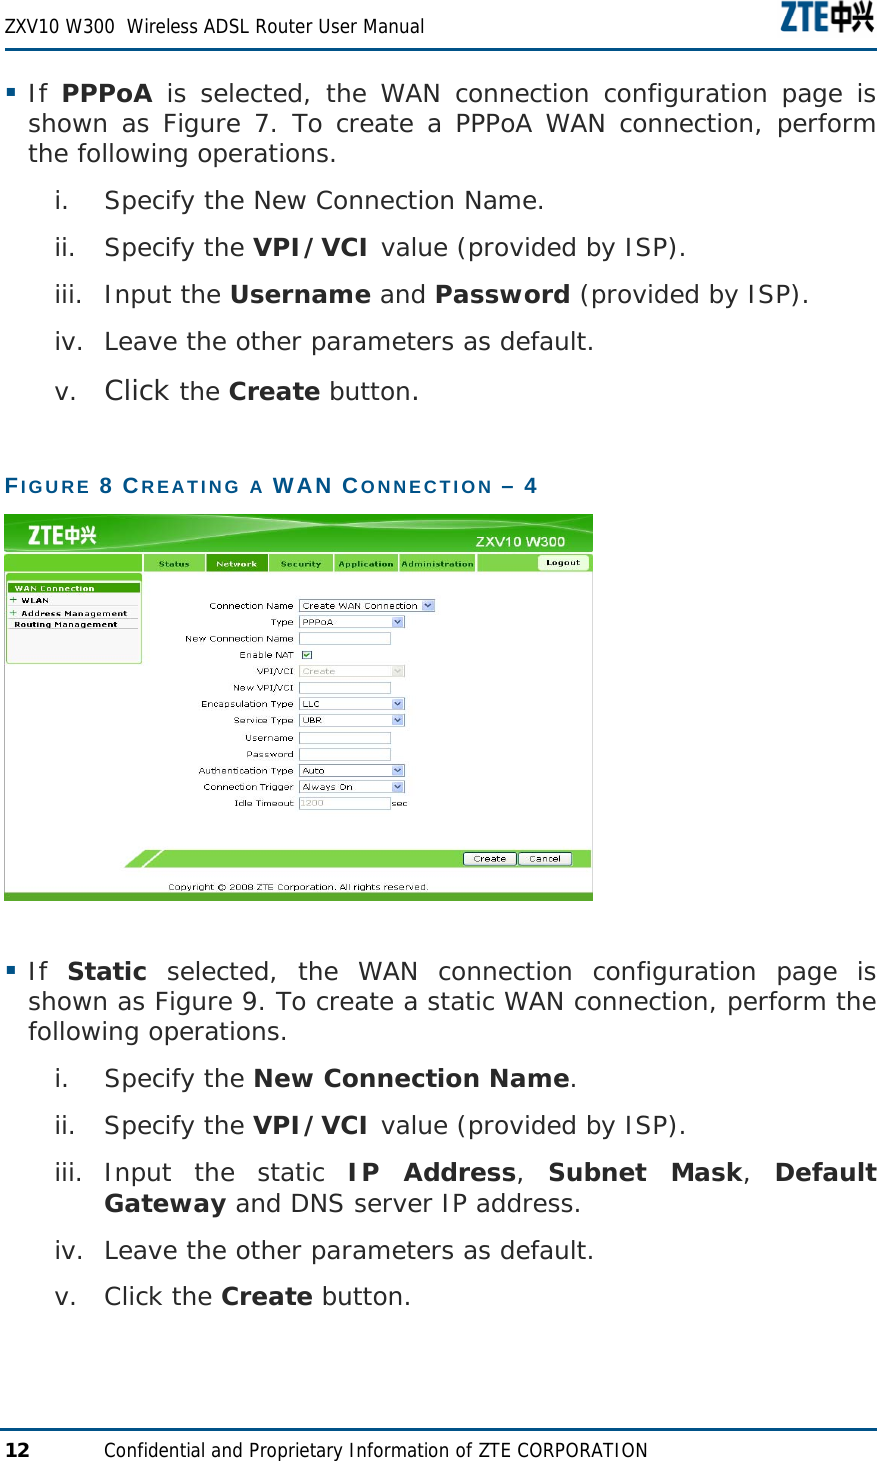  ZXV10 W300  Wireless ADSL Router User Manual  12  Confidential and Proprietary Information of ZTE CORPORATION  If  PPPoA is selected, the WAN connection configuration page is shown as Figure 7. To create a PPPoA WAN connection, perform the following operations. i. Specify the New Connection Name. ii. Specify the VPI/VCI value (provided by ISP). iii. Input the Username and Password (provided by ISP). iv. Leave the other parameters as default. v. Click the Create button. FIGURE 8 CREATING A WAN CONNECTION – 4    If  Static selected, the WAN connection configuration page is shown as Figure 9. To create a static WAN connection, perform the following operations. i. Specify the New Connection Name. ii. Specify the VPI/VCI value (provided by ISP). iii. Input the static IP Address,  Subnet Mask,  Default Gateway and DNS server IP address. iv. Leave the other parameters as default. v. Click the Create button. 